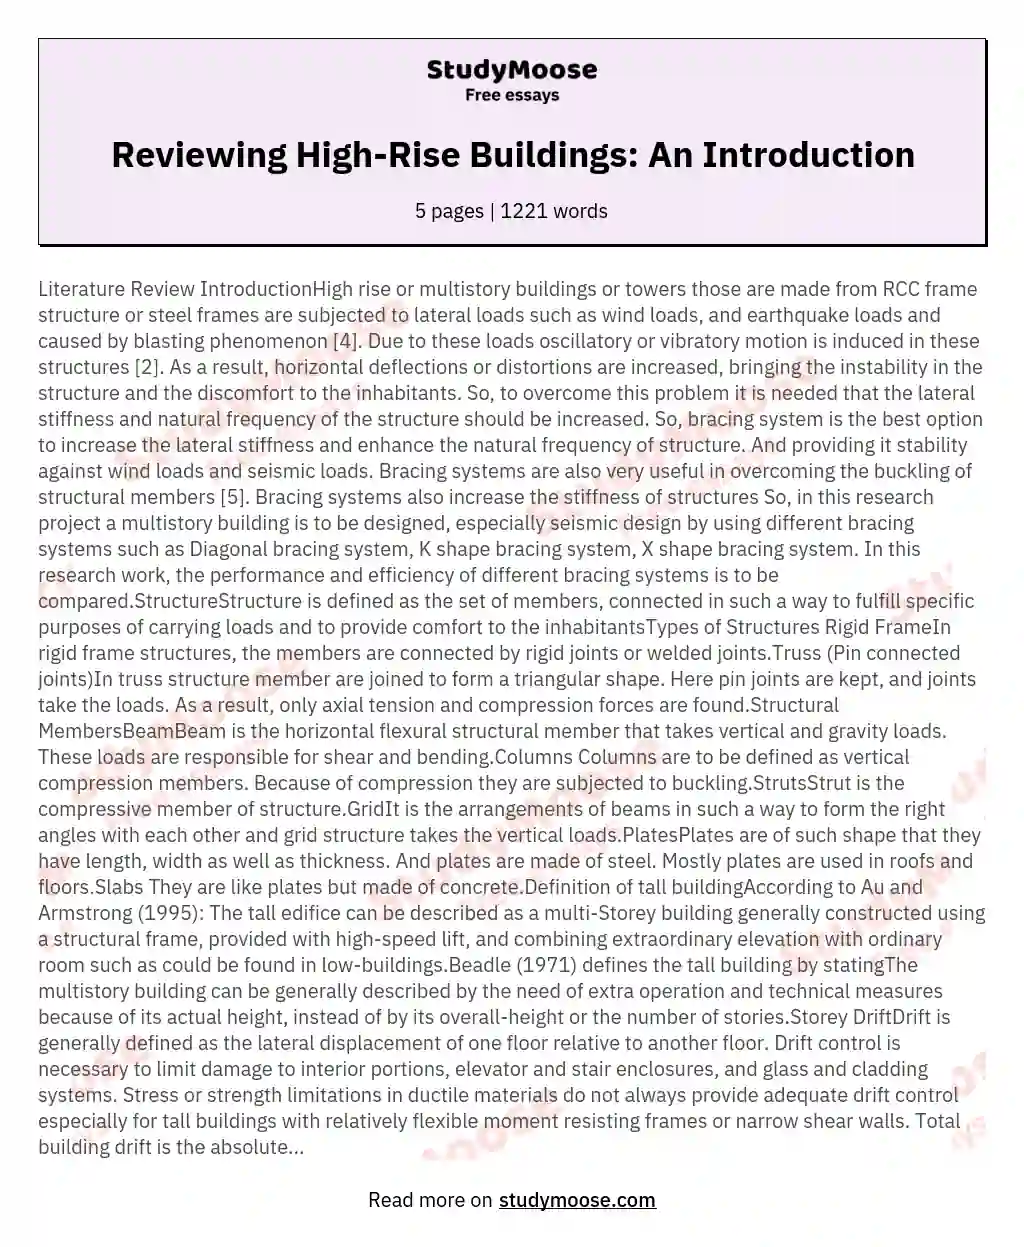 Reviewing High-Rise Buildings: An Introduction essay